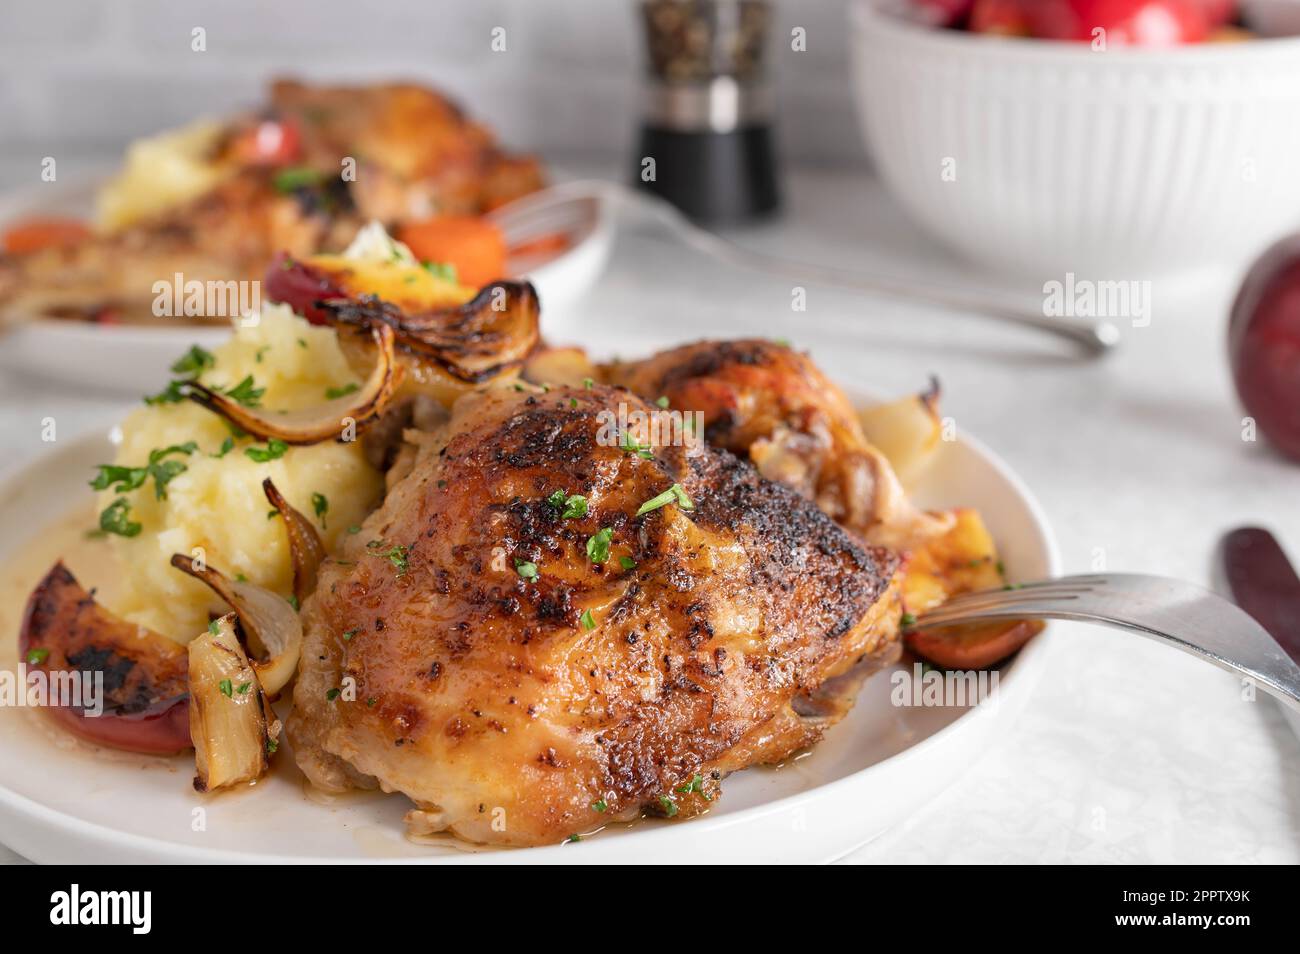 Baked chicken shanks with mashed potatoes, roasted onions and apples on a plate Stock Photo